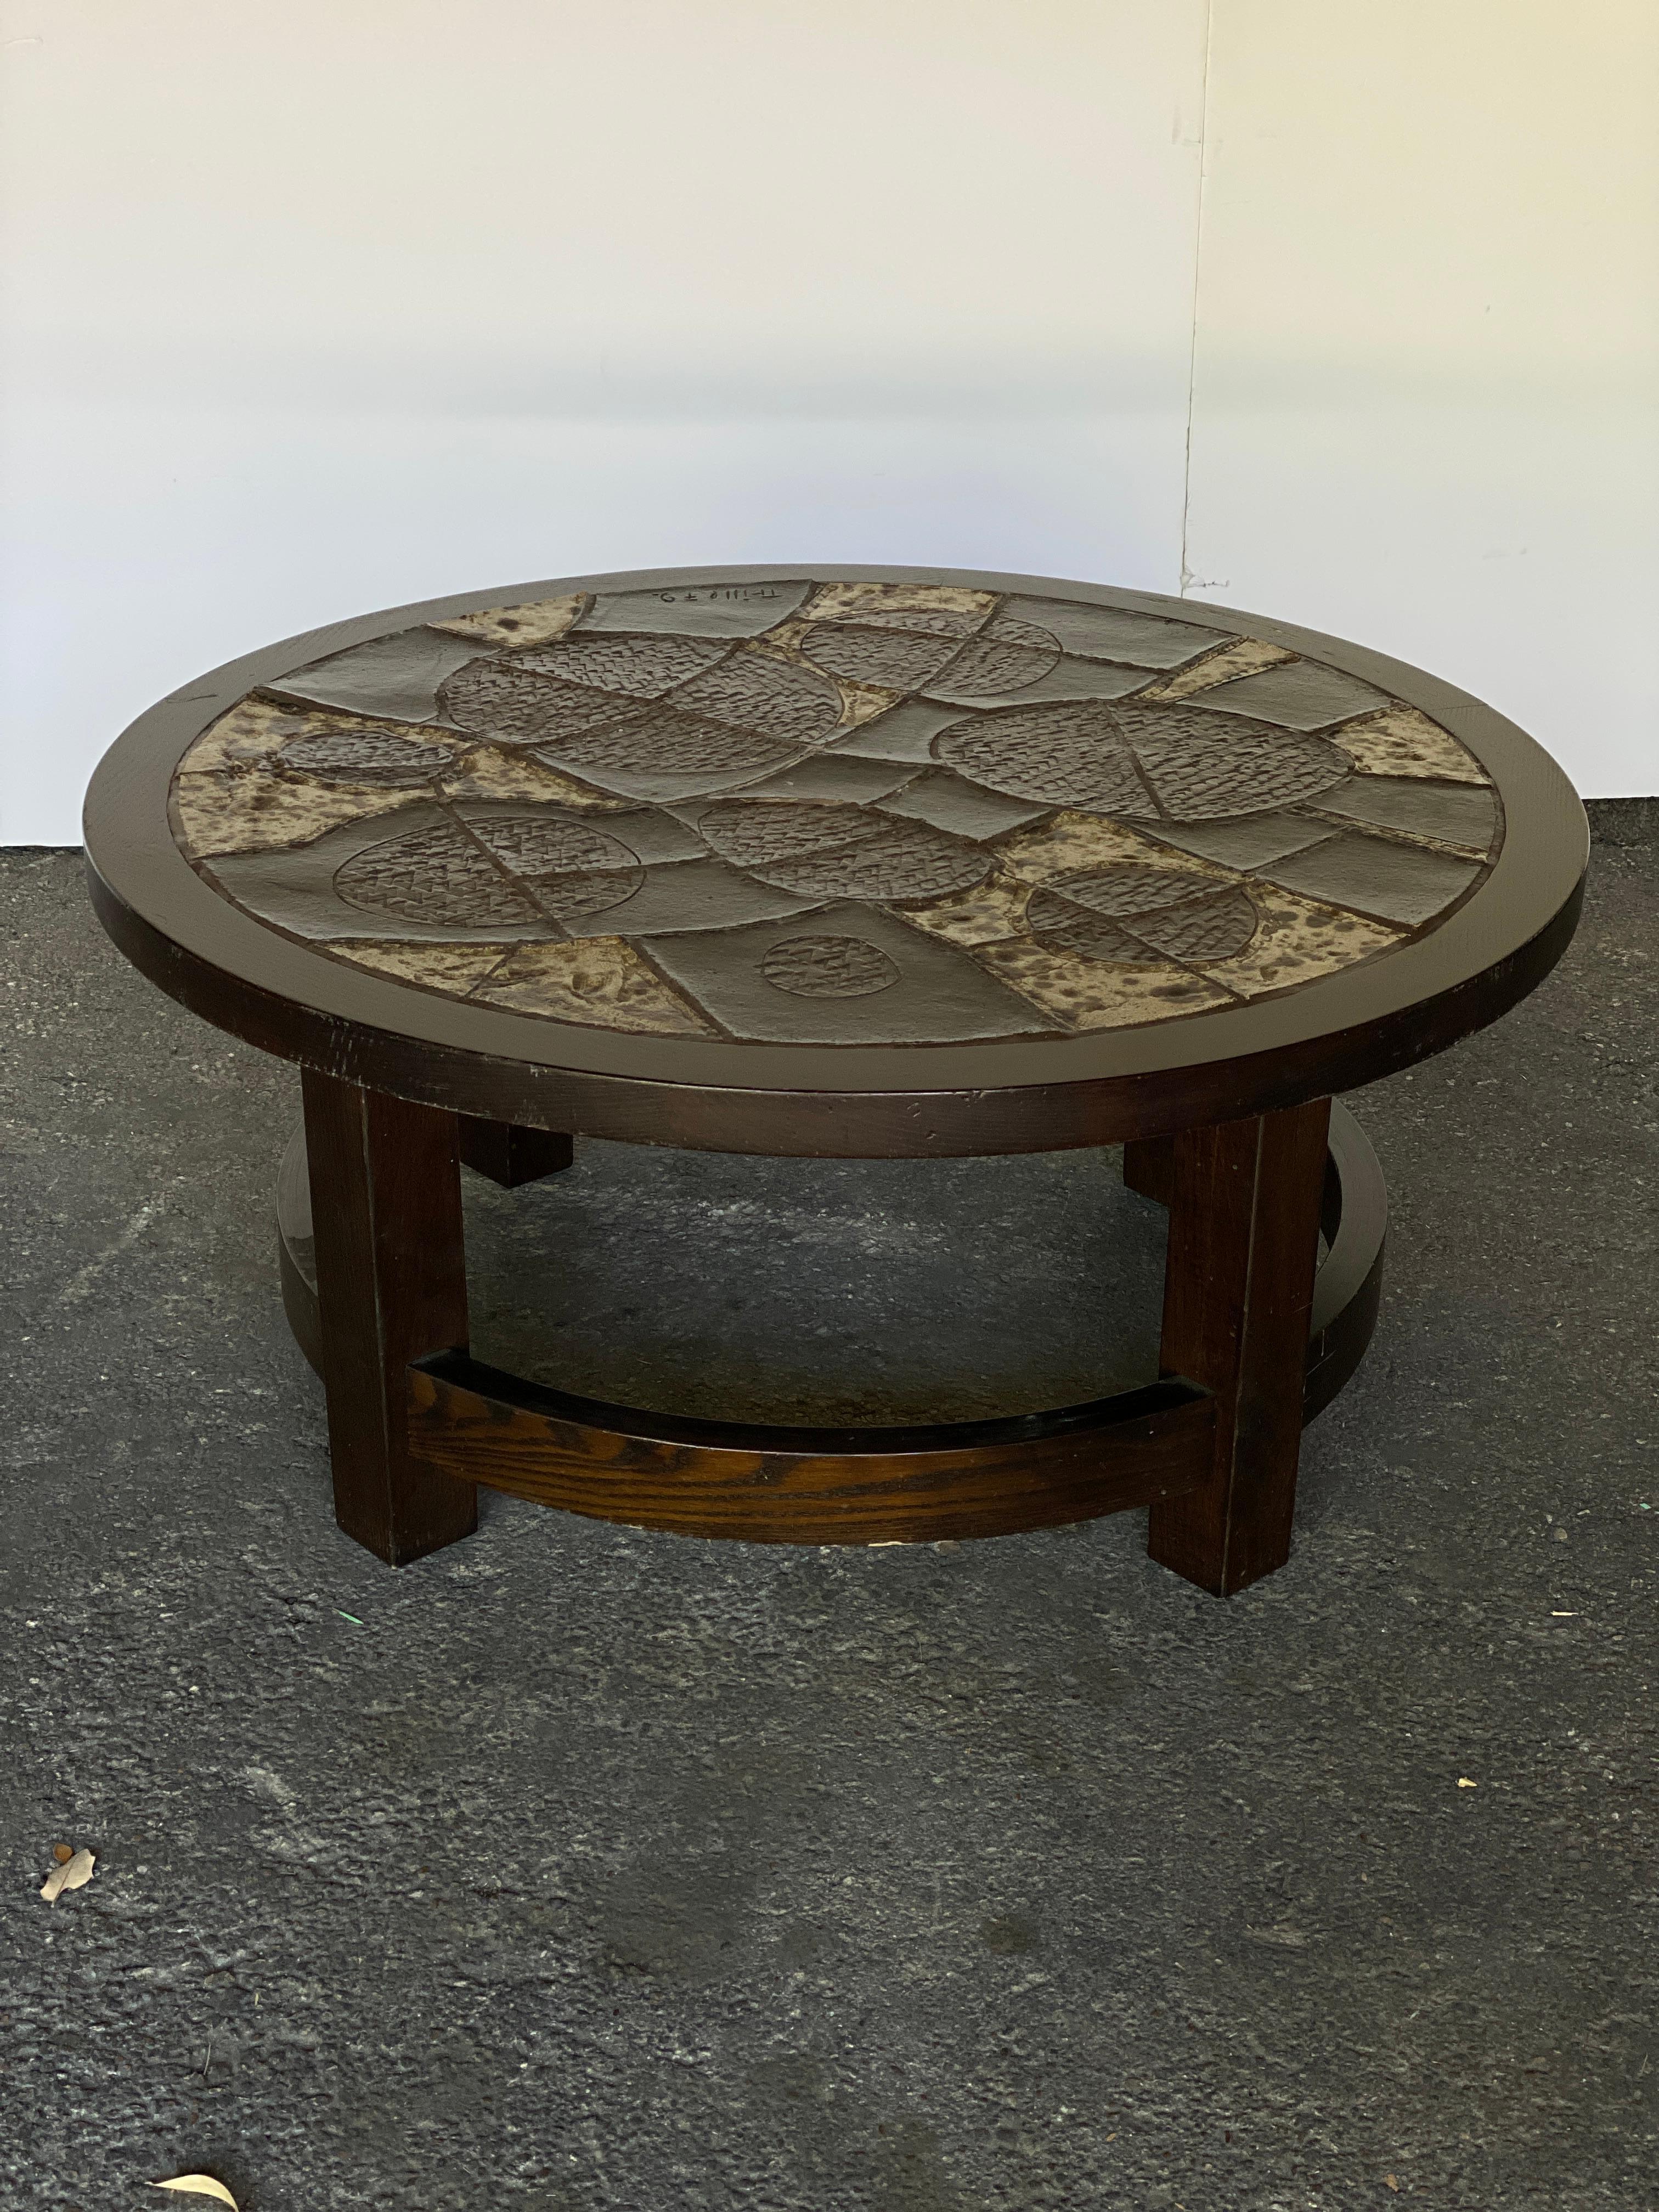 Mid-Century Modern round cocktail table in the Brutalist style with rustic ceramic tile top and wood base (probably stained oak.) Signed. Belgium, 1960-70's.